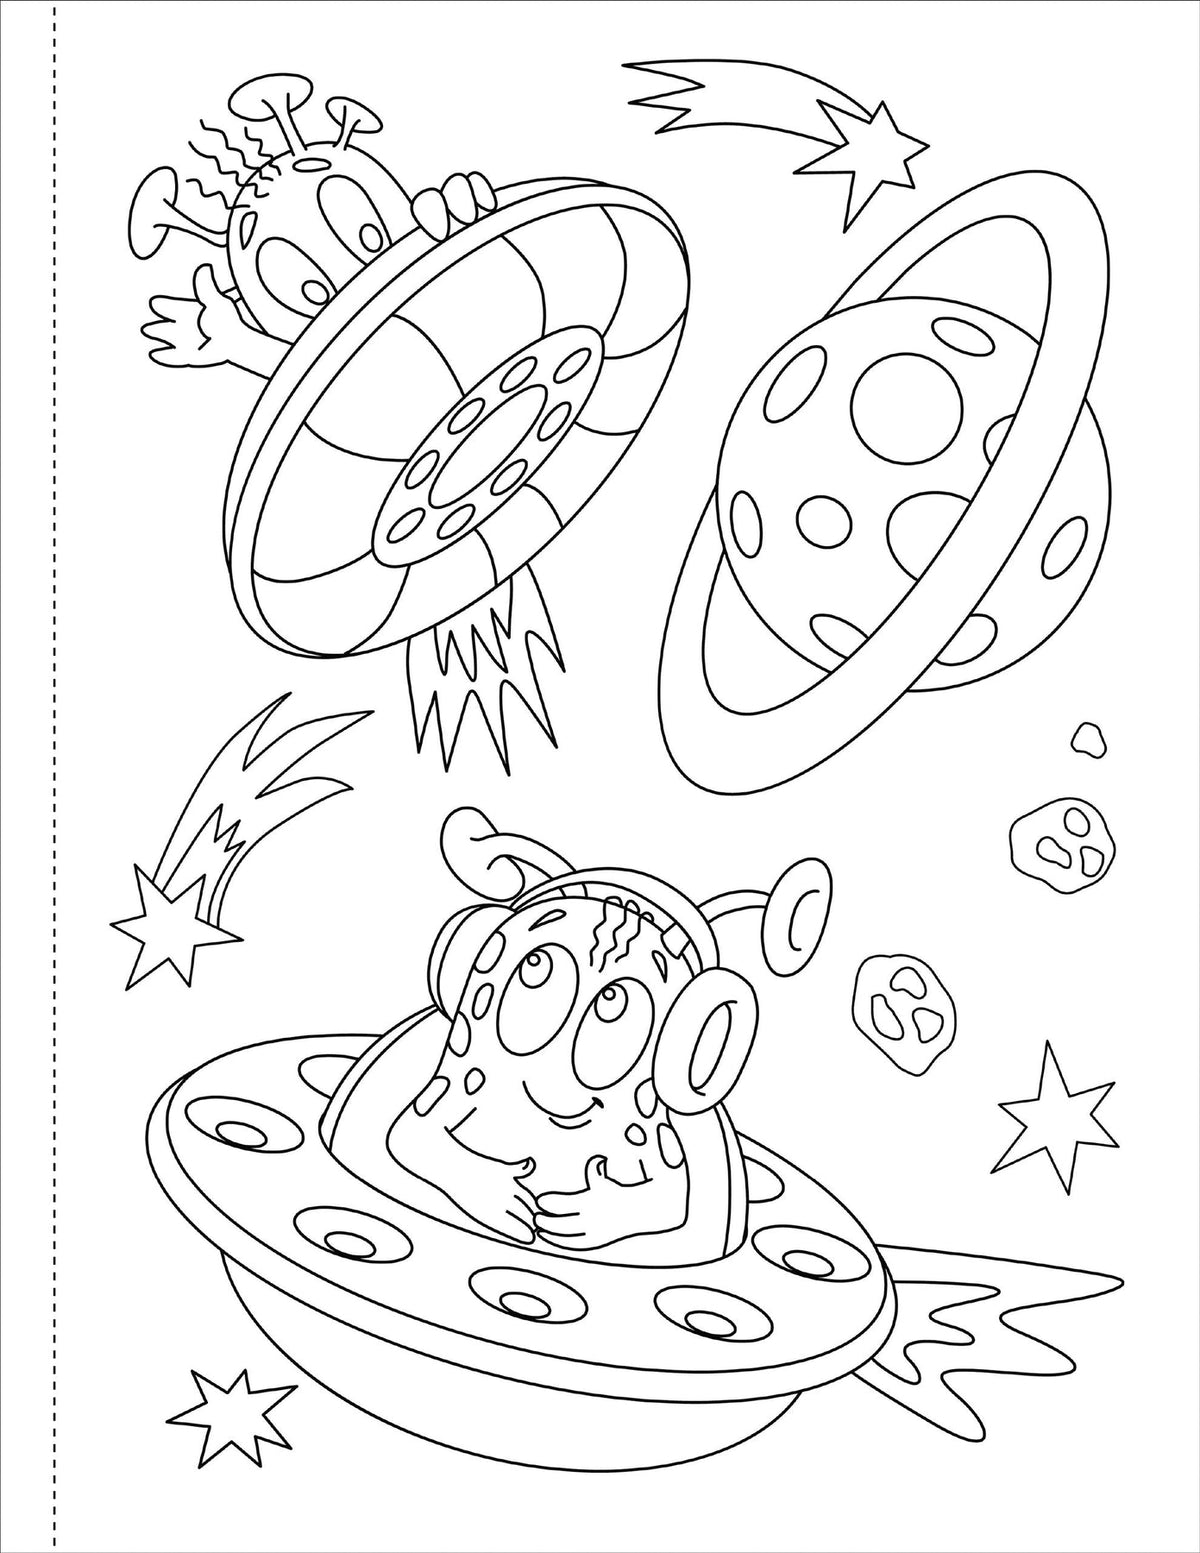 Solar System Colouring Book (Peter Pauper Press)